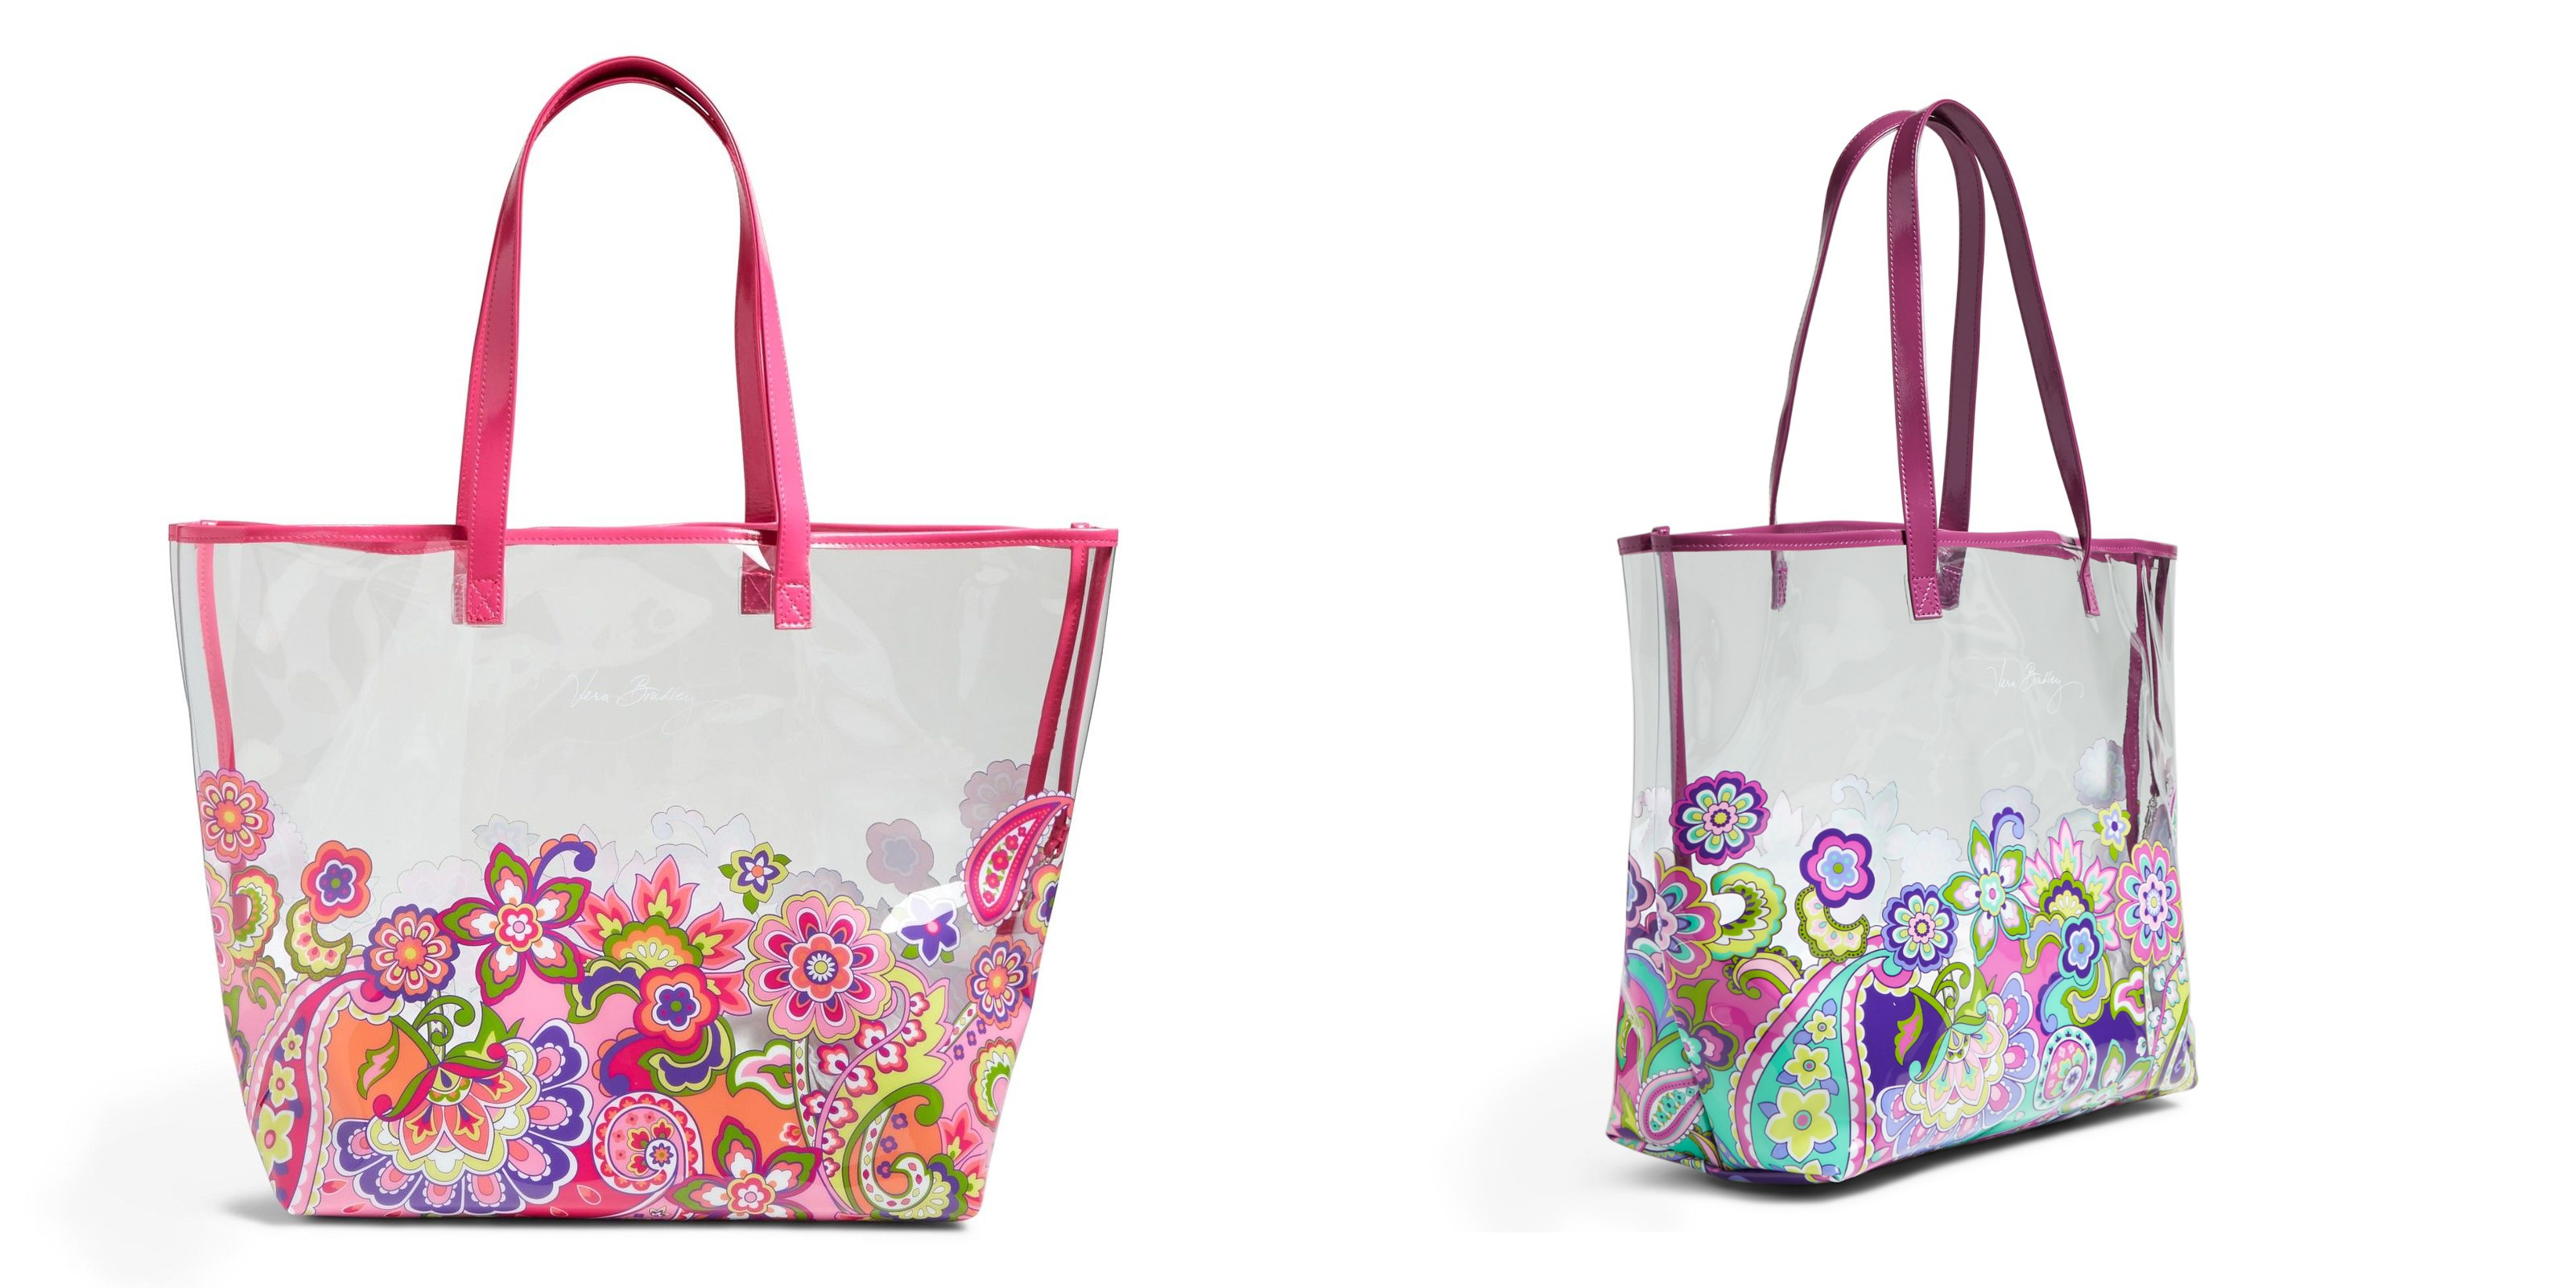 Vera Bradley Clearly Colorful Tote Bag Only $16.99! (Reg $58.00)